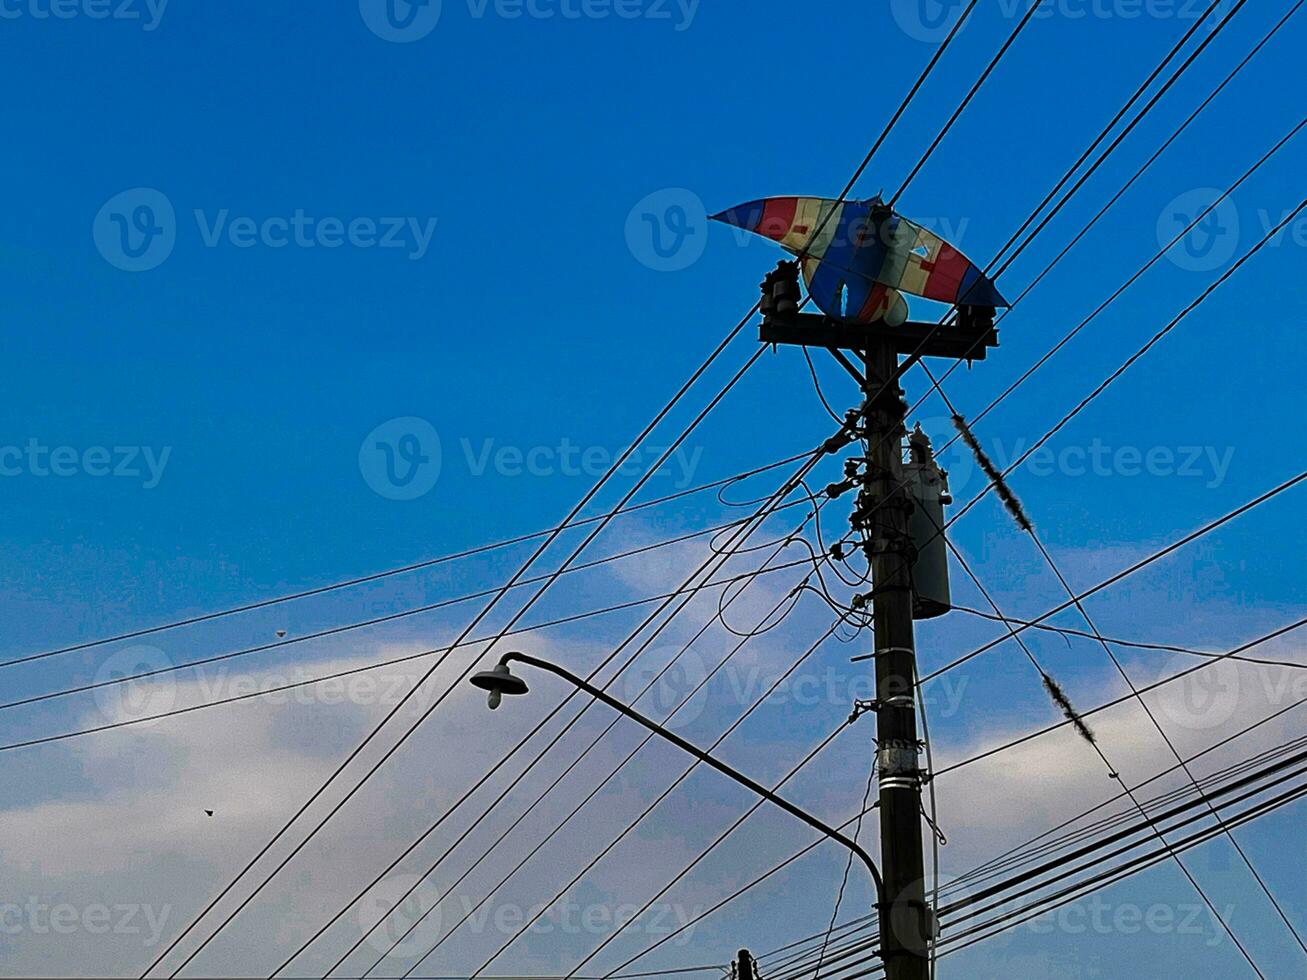 The kite caught in an electric pole photo